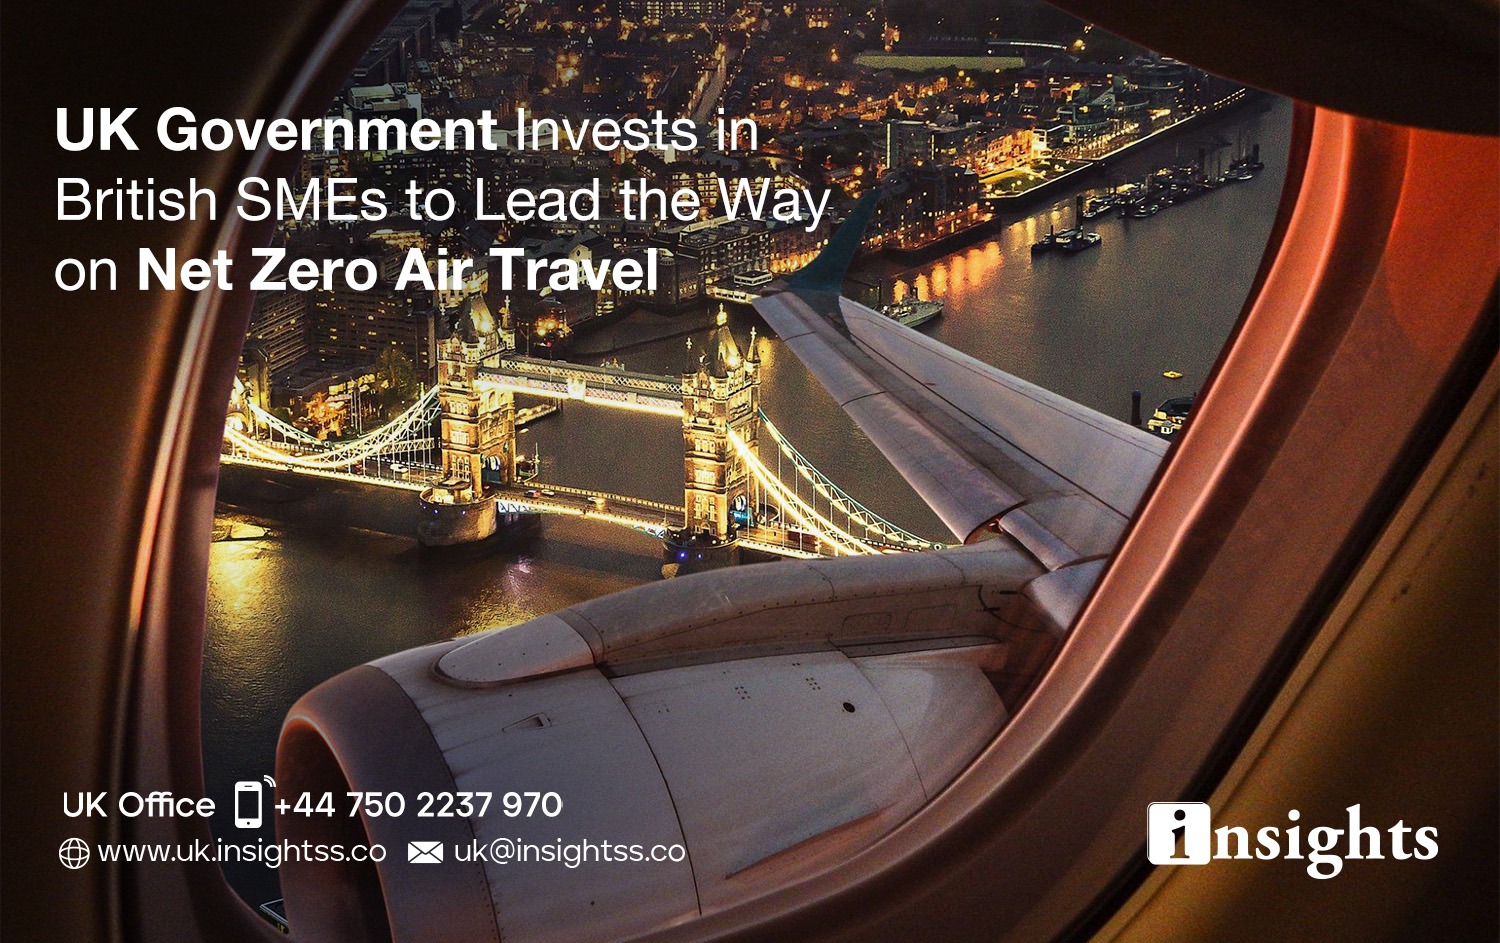 UK Government Invests in British SMEs to Lead the Way on Net Zero Air Travel